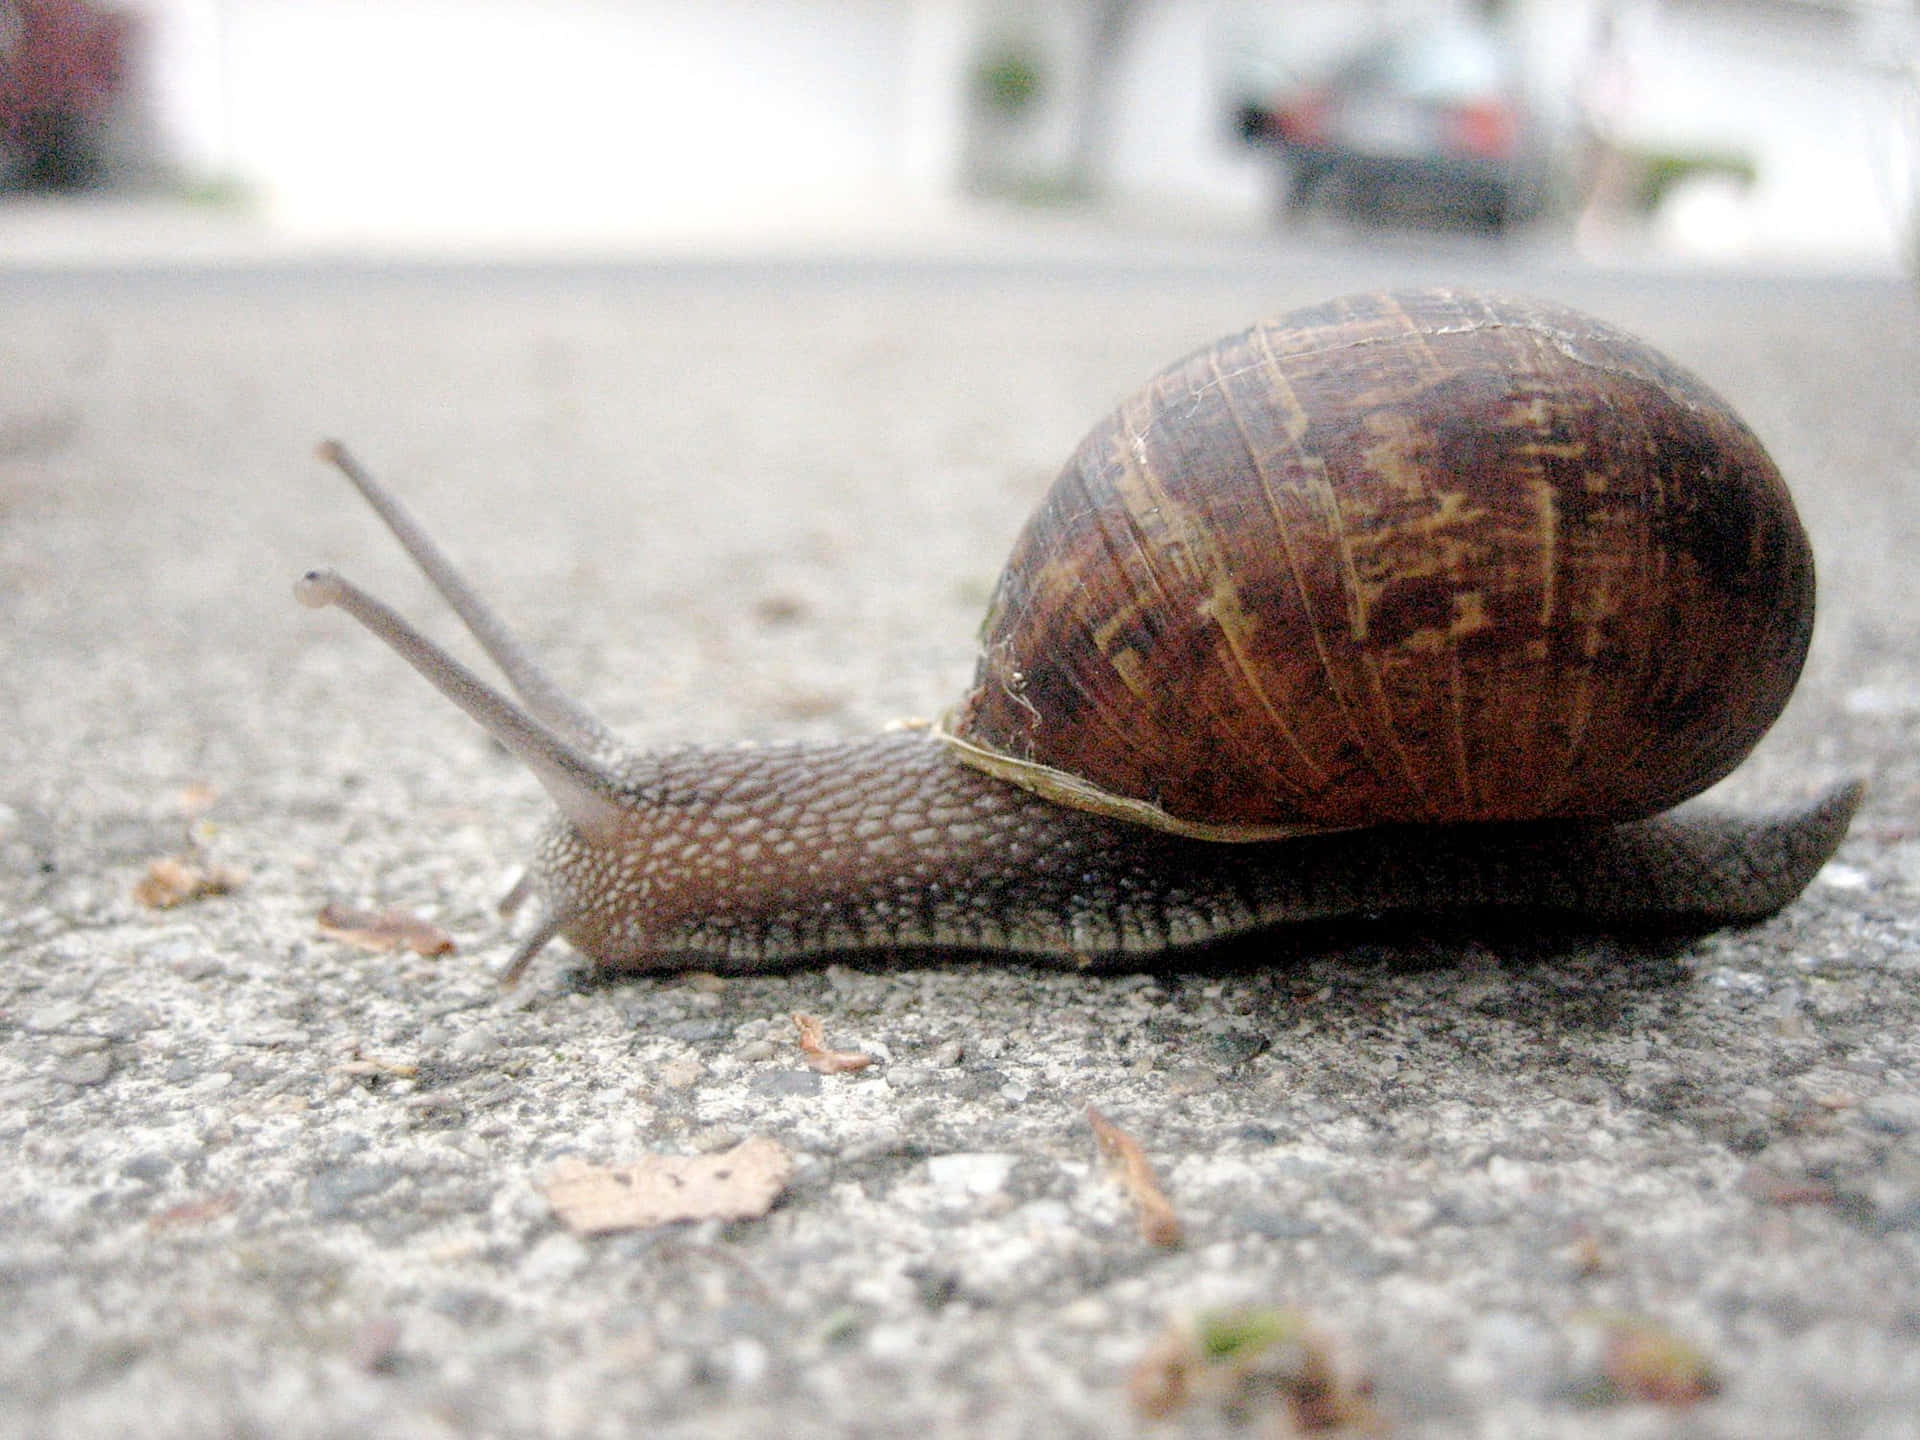 The Slow, yet Steady Journey of a Snail